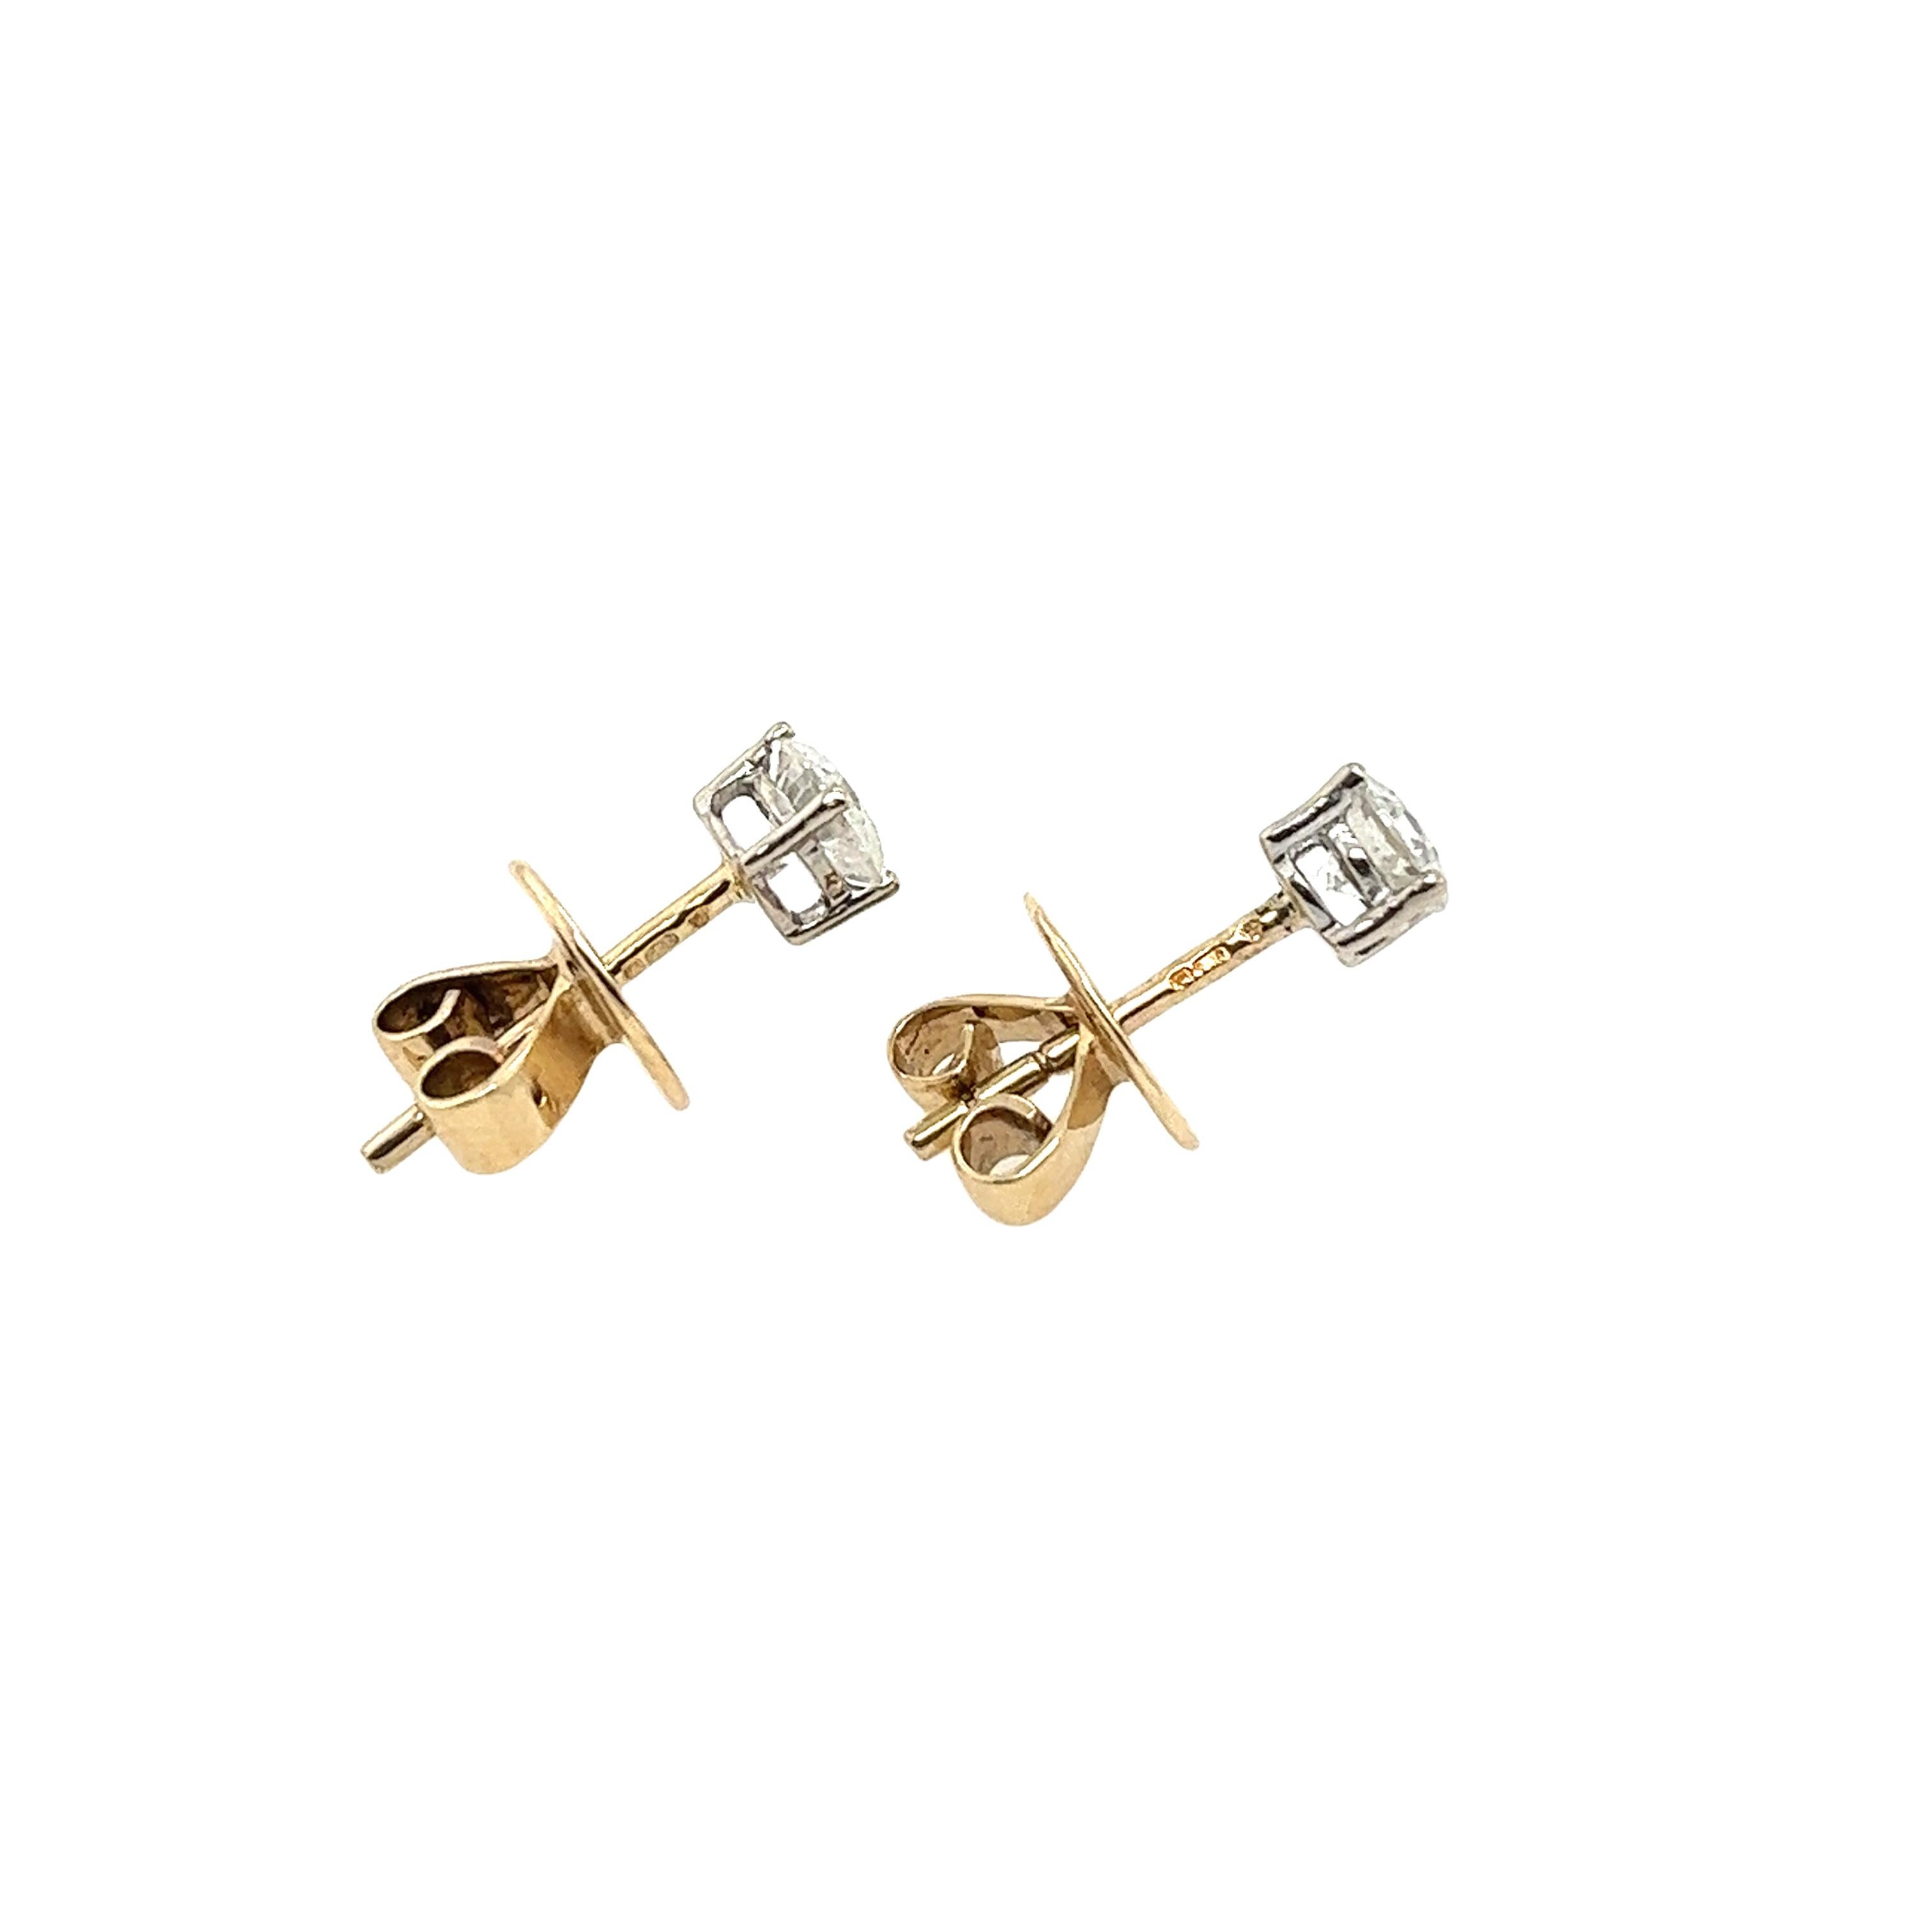 9ct Yellow & White Gold Diamond Stud Earrings, 0.65ct Total Diamond Weight For Sale 2